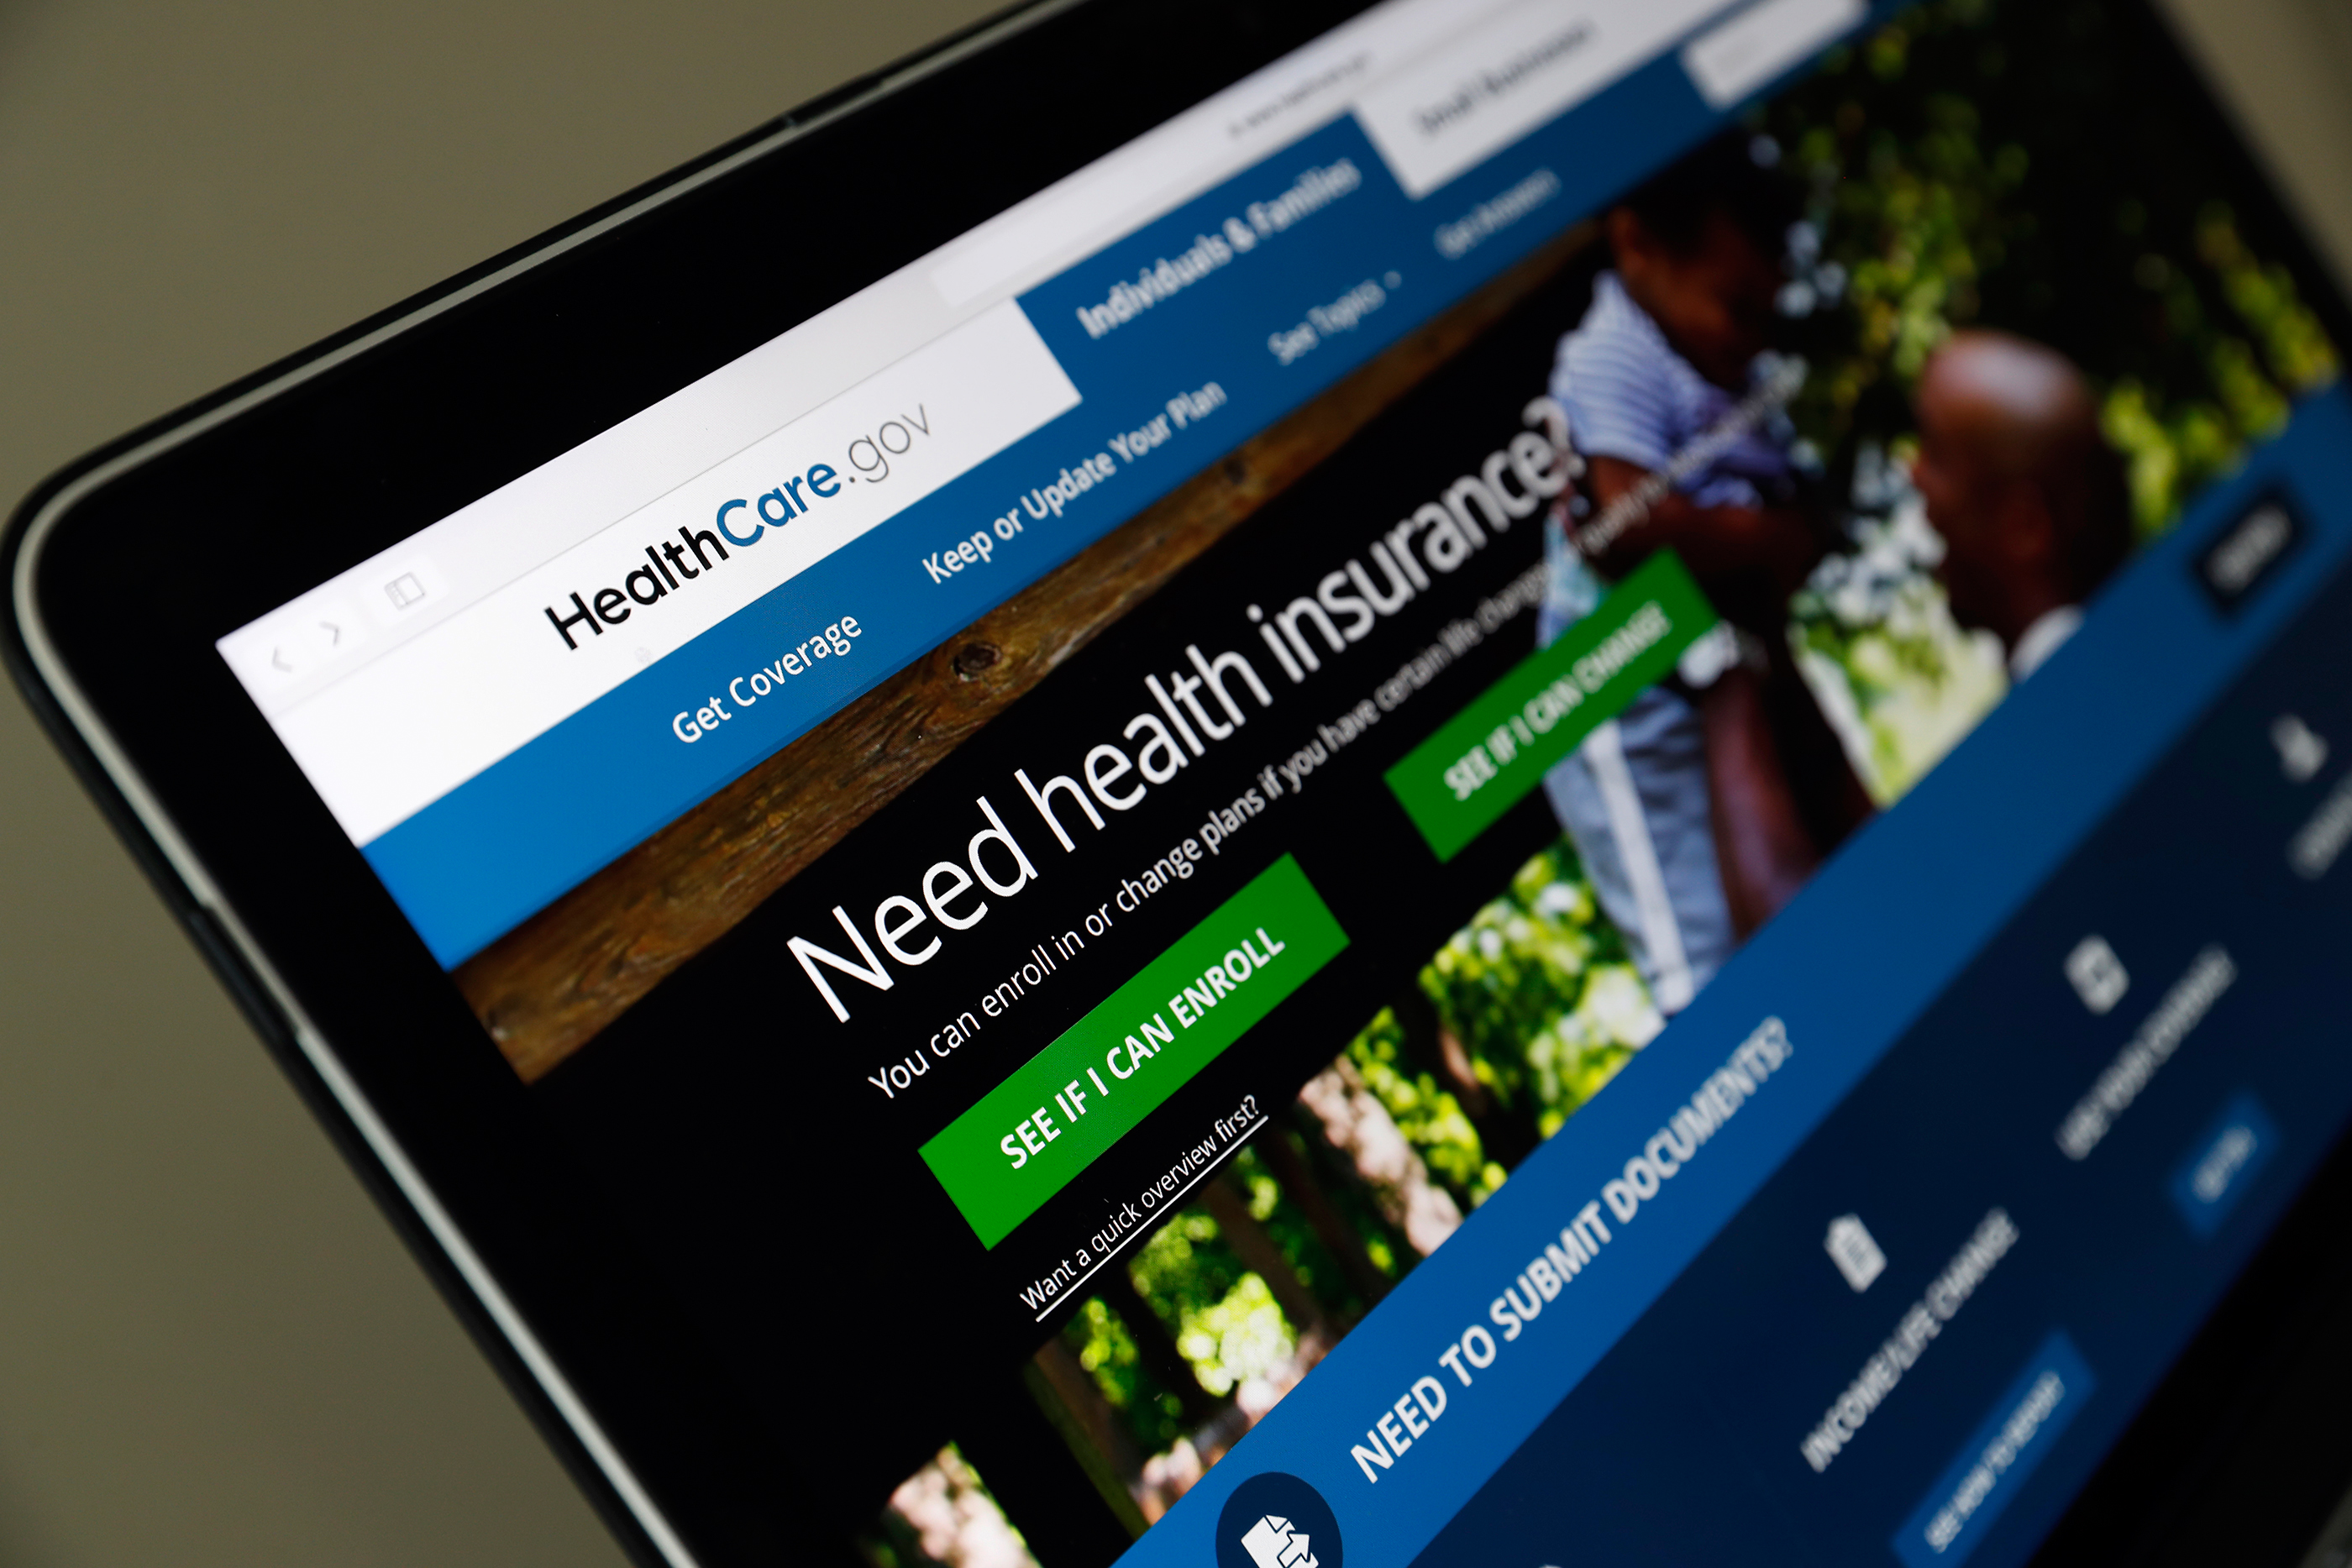 In this May 18, 2017 file photo, the Healthcare.gov website is seen on a laptop computer, in Washington. Former Obama administration officials say they're launching a private campaign to encourage people to sign up for coverage next year under the Affordable Care Act. With the start of open enrollment just weeks away on Nov. 1, the Trump administration has slashed "Obamacare's" ad budget, as well as grants to outside organizations that are supposed to help consumers sign up. (Alex Brandon&mdash;AP)